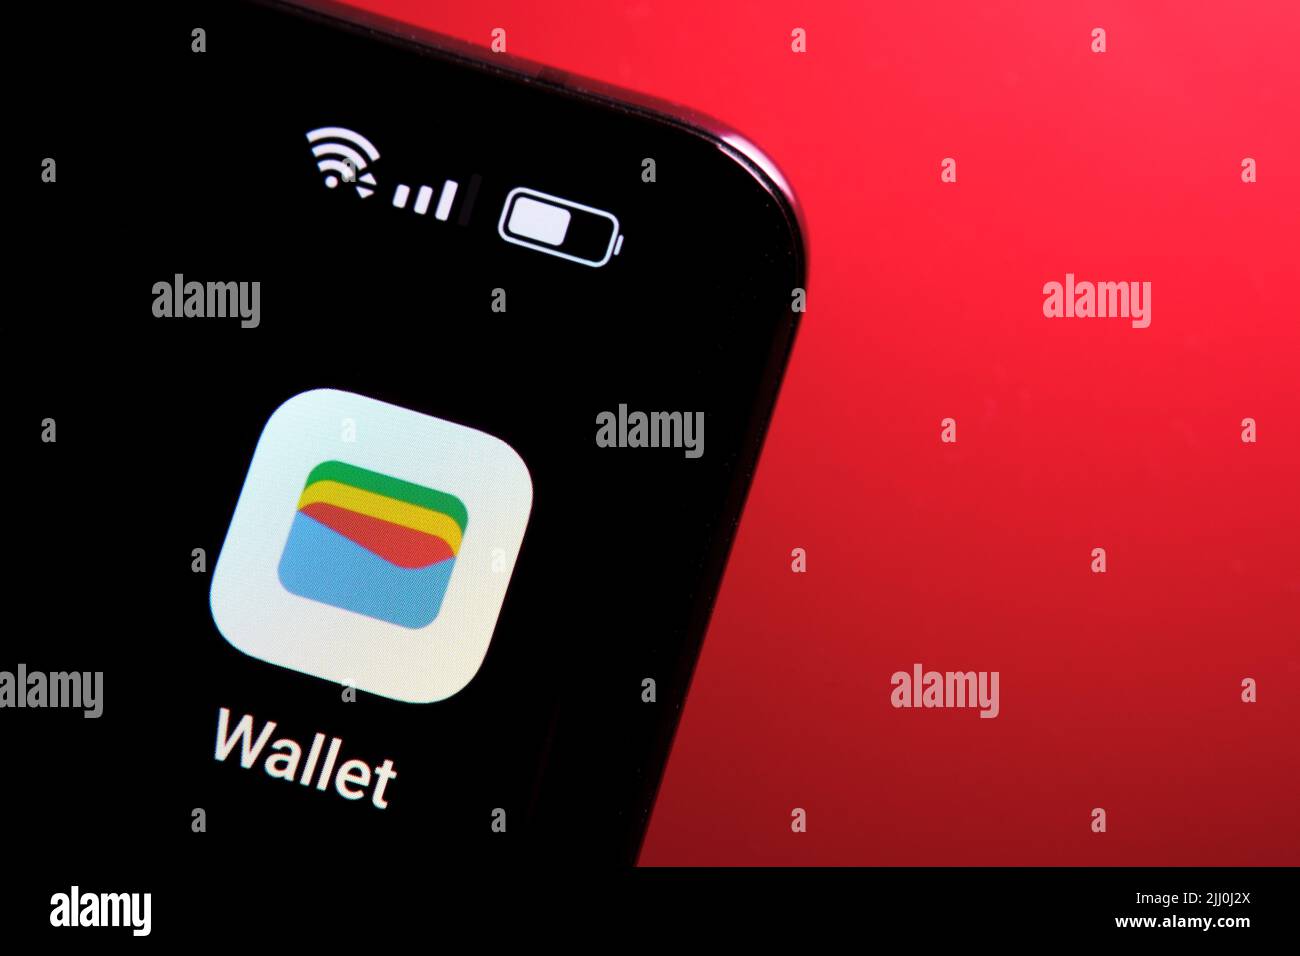 New Google Wallet app seen on the screen of smartphone. Google Pay rebranded to Google Wallet. Stafford, United Kingdom, July 21, 2022 Stock Photo